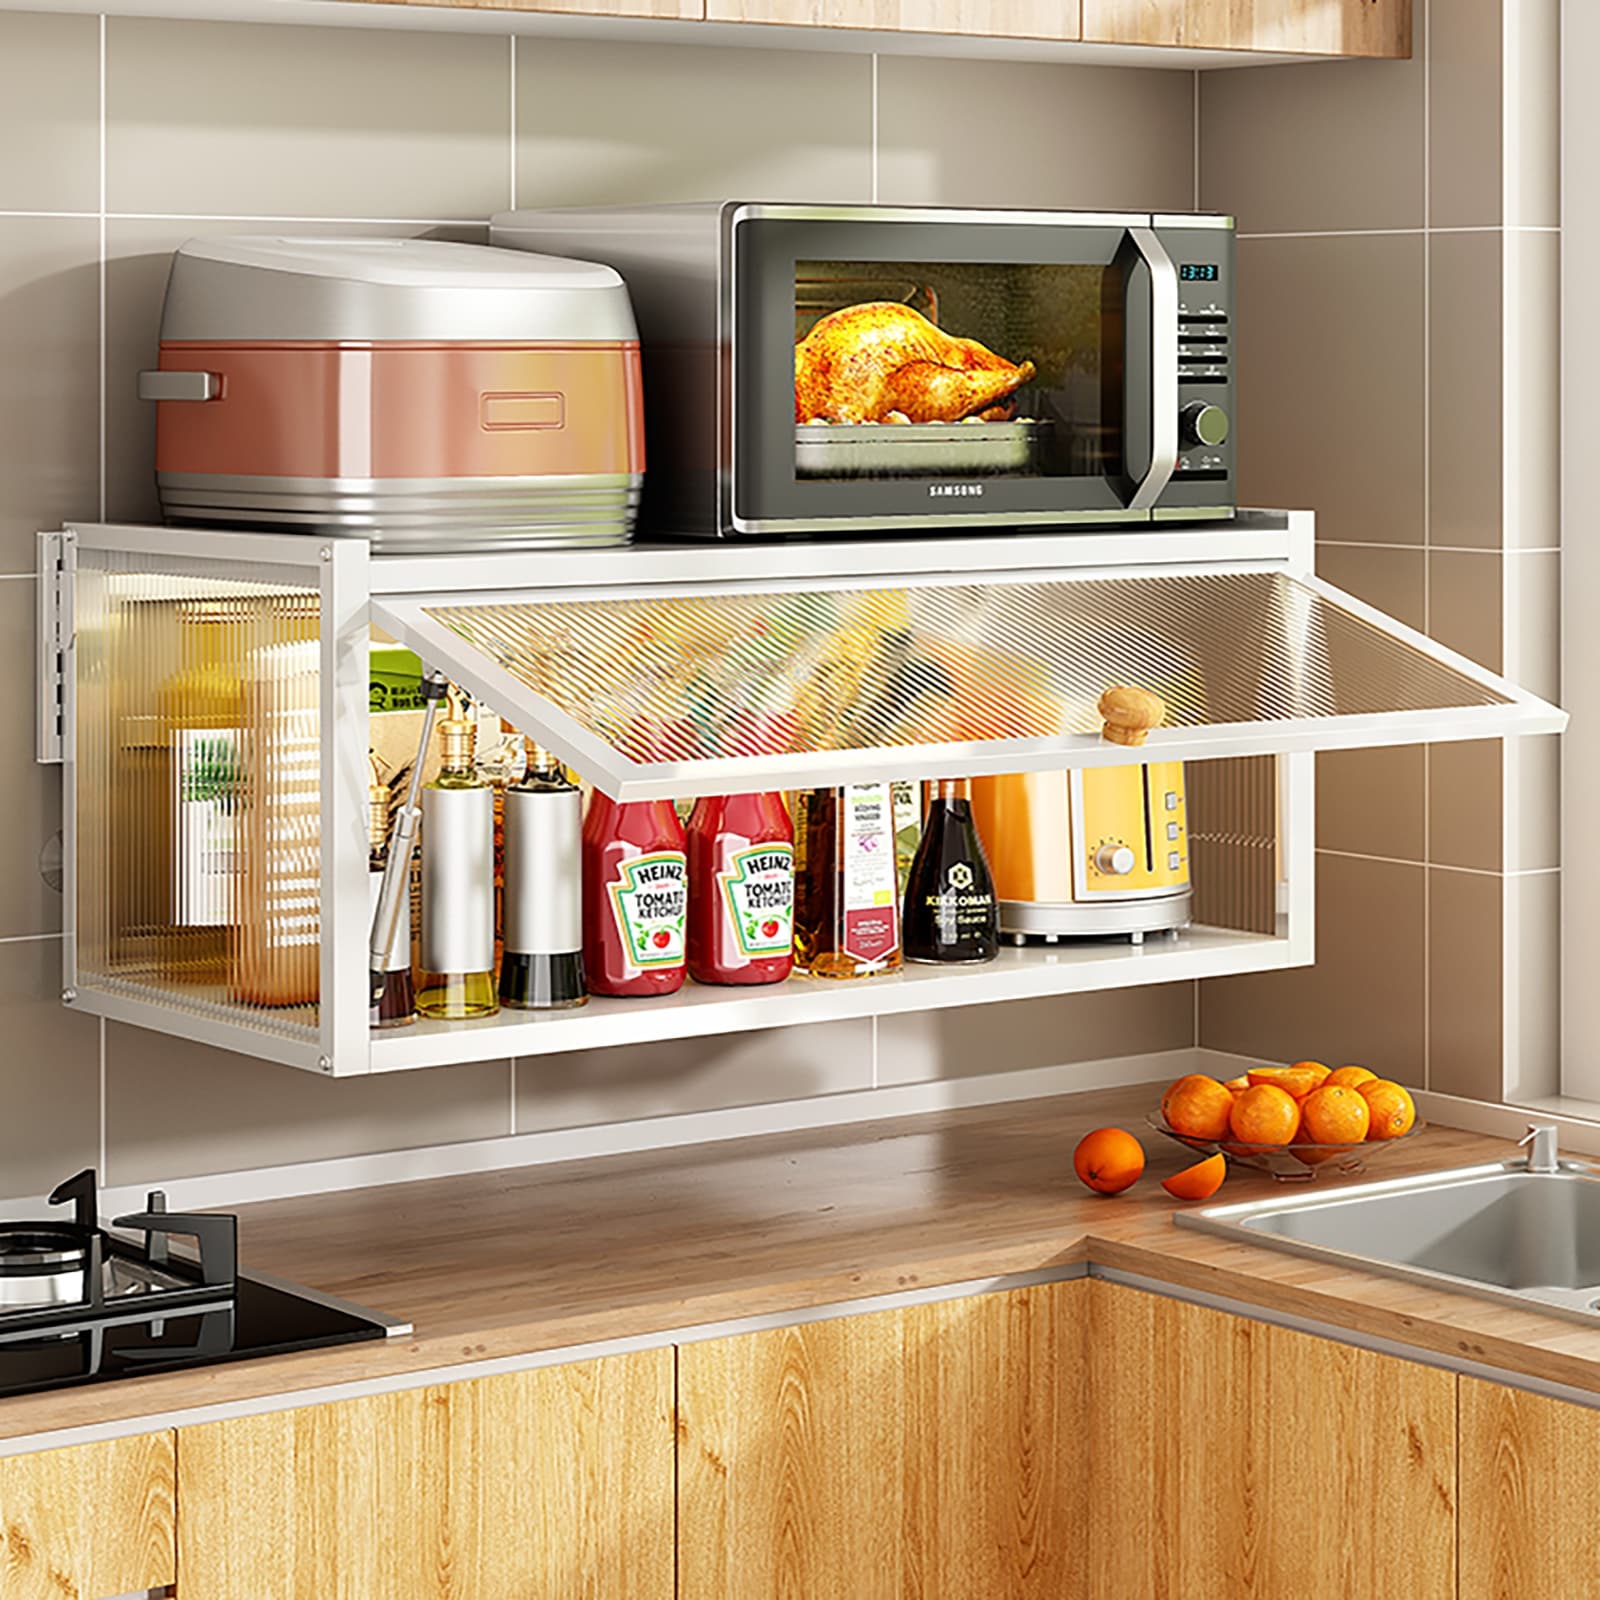 https://ak1.ostkcdn.com/images/products/is/images/direct/aa8f9f20f4069236104e1c18a604926e129f9209/Wall-Mounted-Kitchen-Storage-Cabinet-With-Flip-Up-Door.jpg